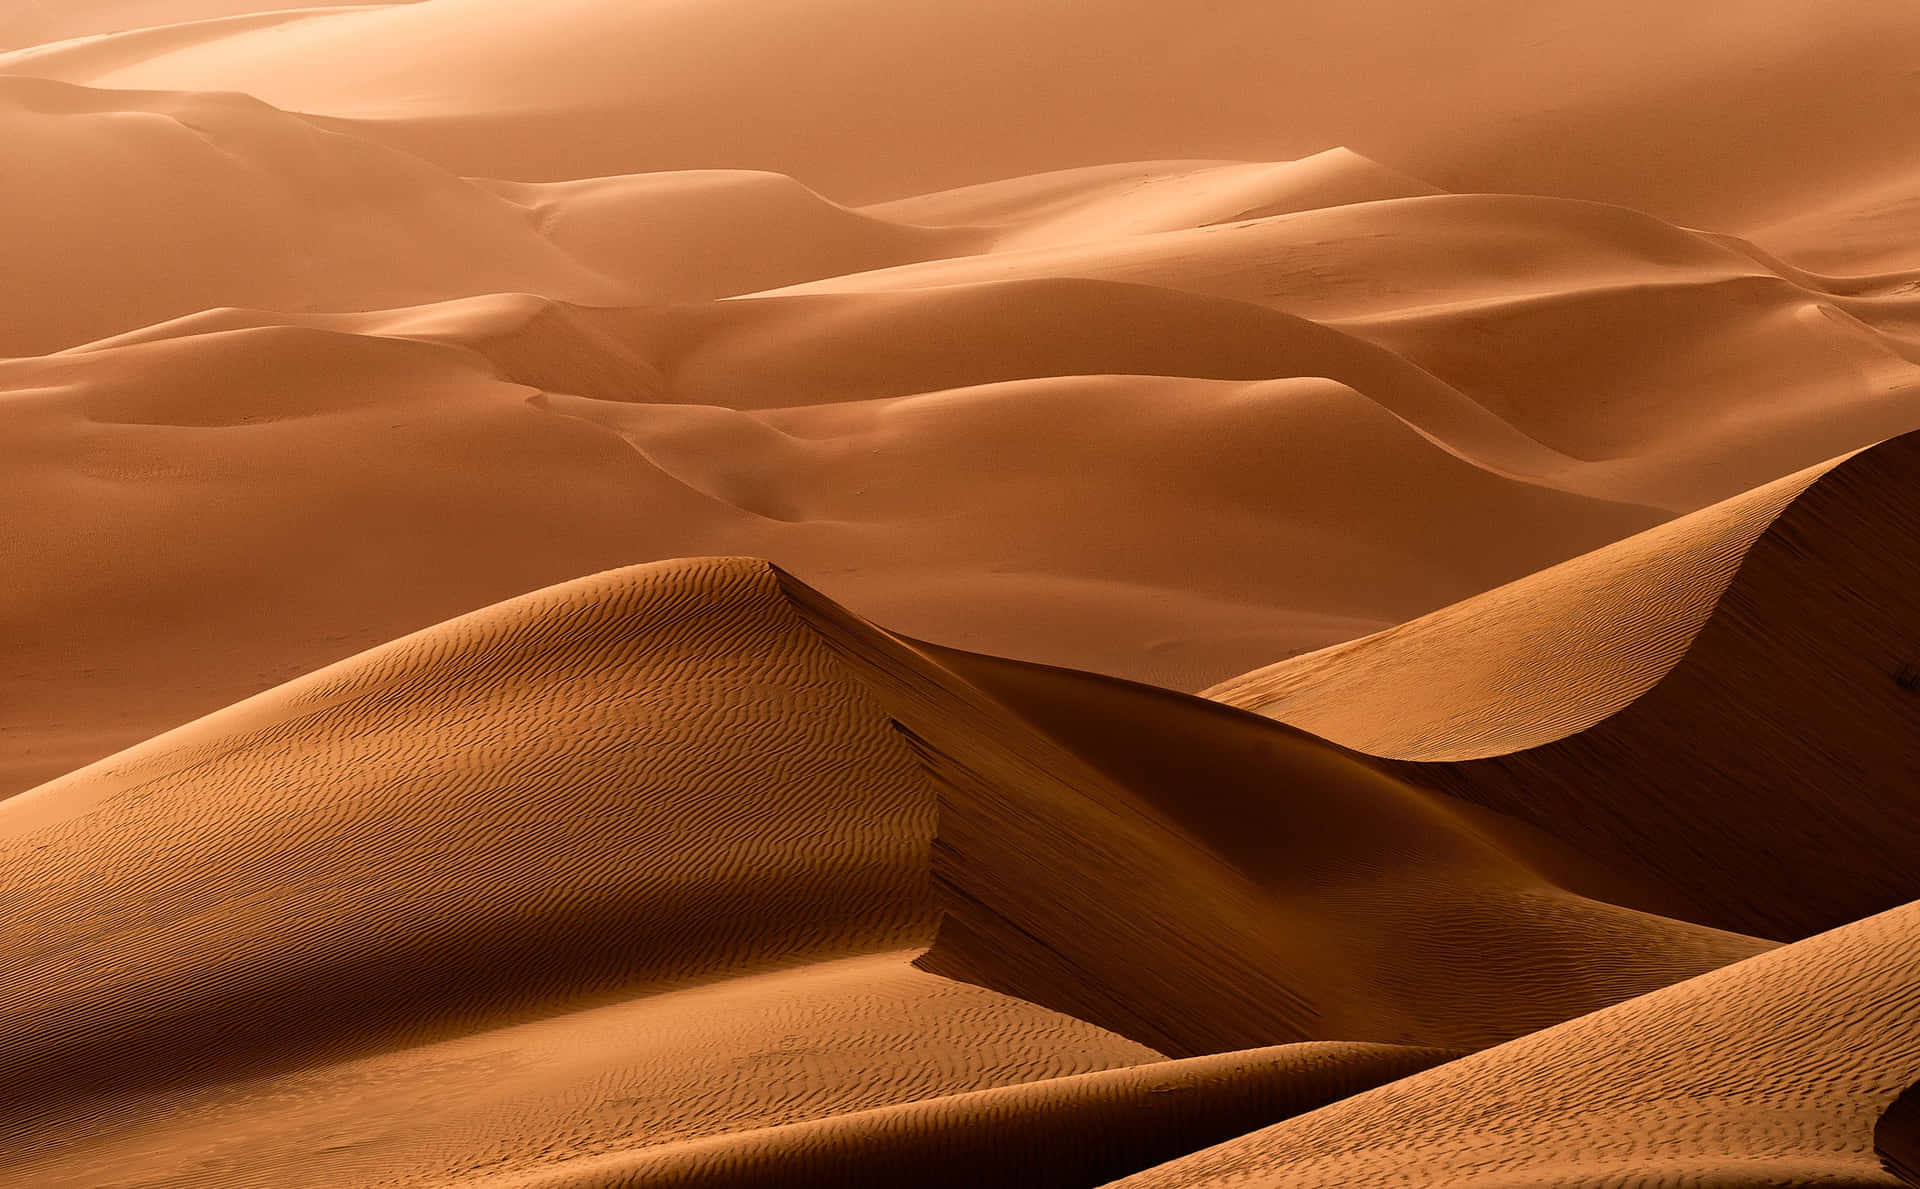 A Desert With Sand Dunes And A Lot Of Sand